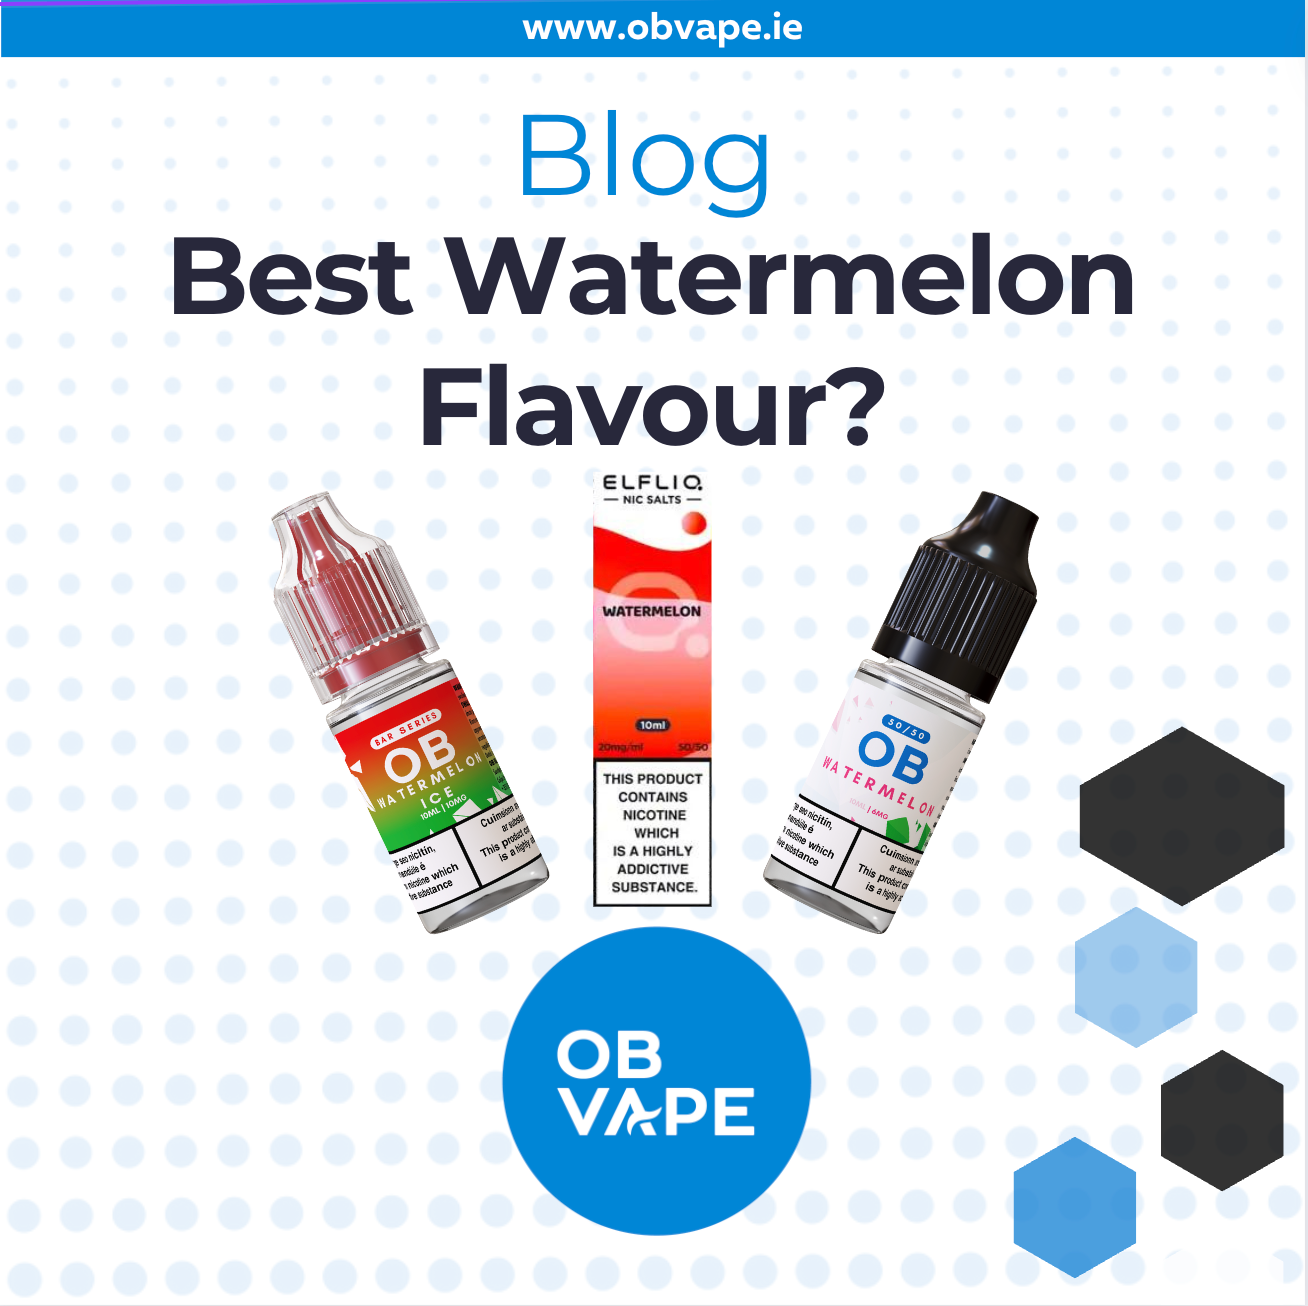 What Are The Best Watermelon Flavoured E-Liquids?